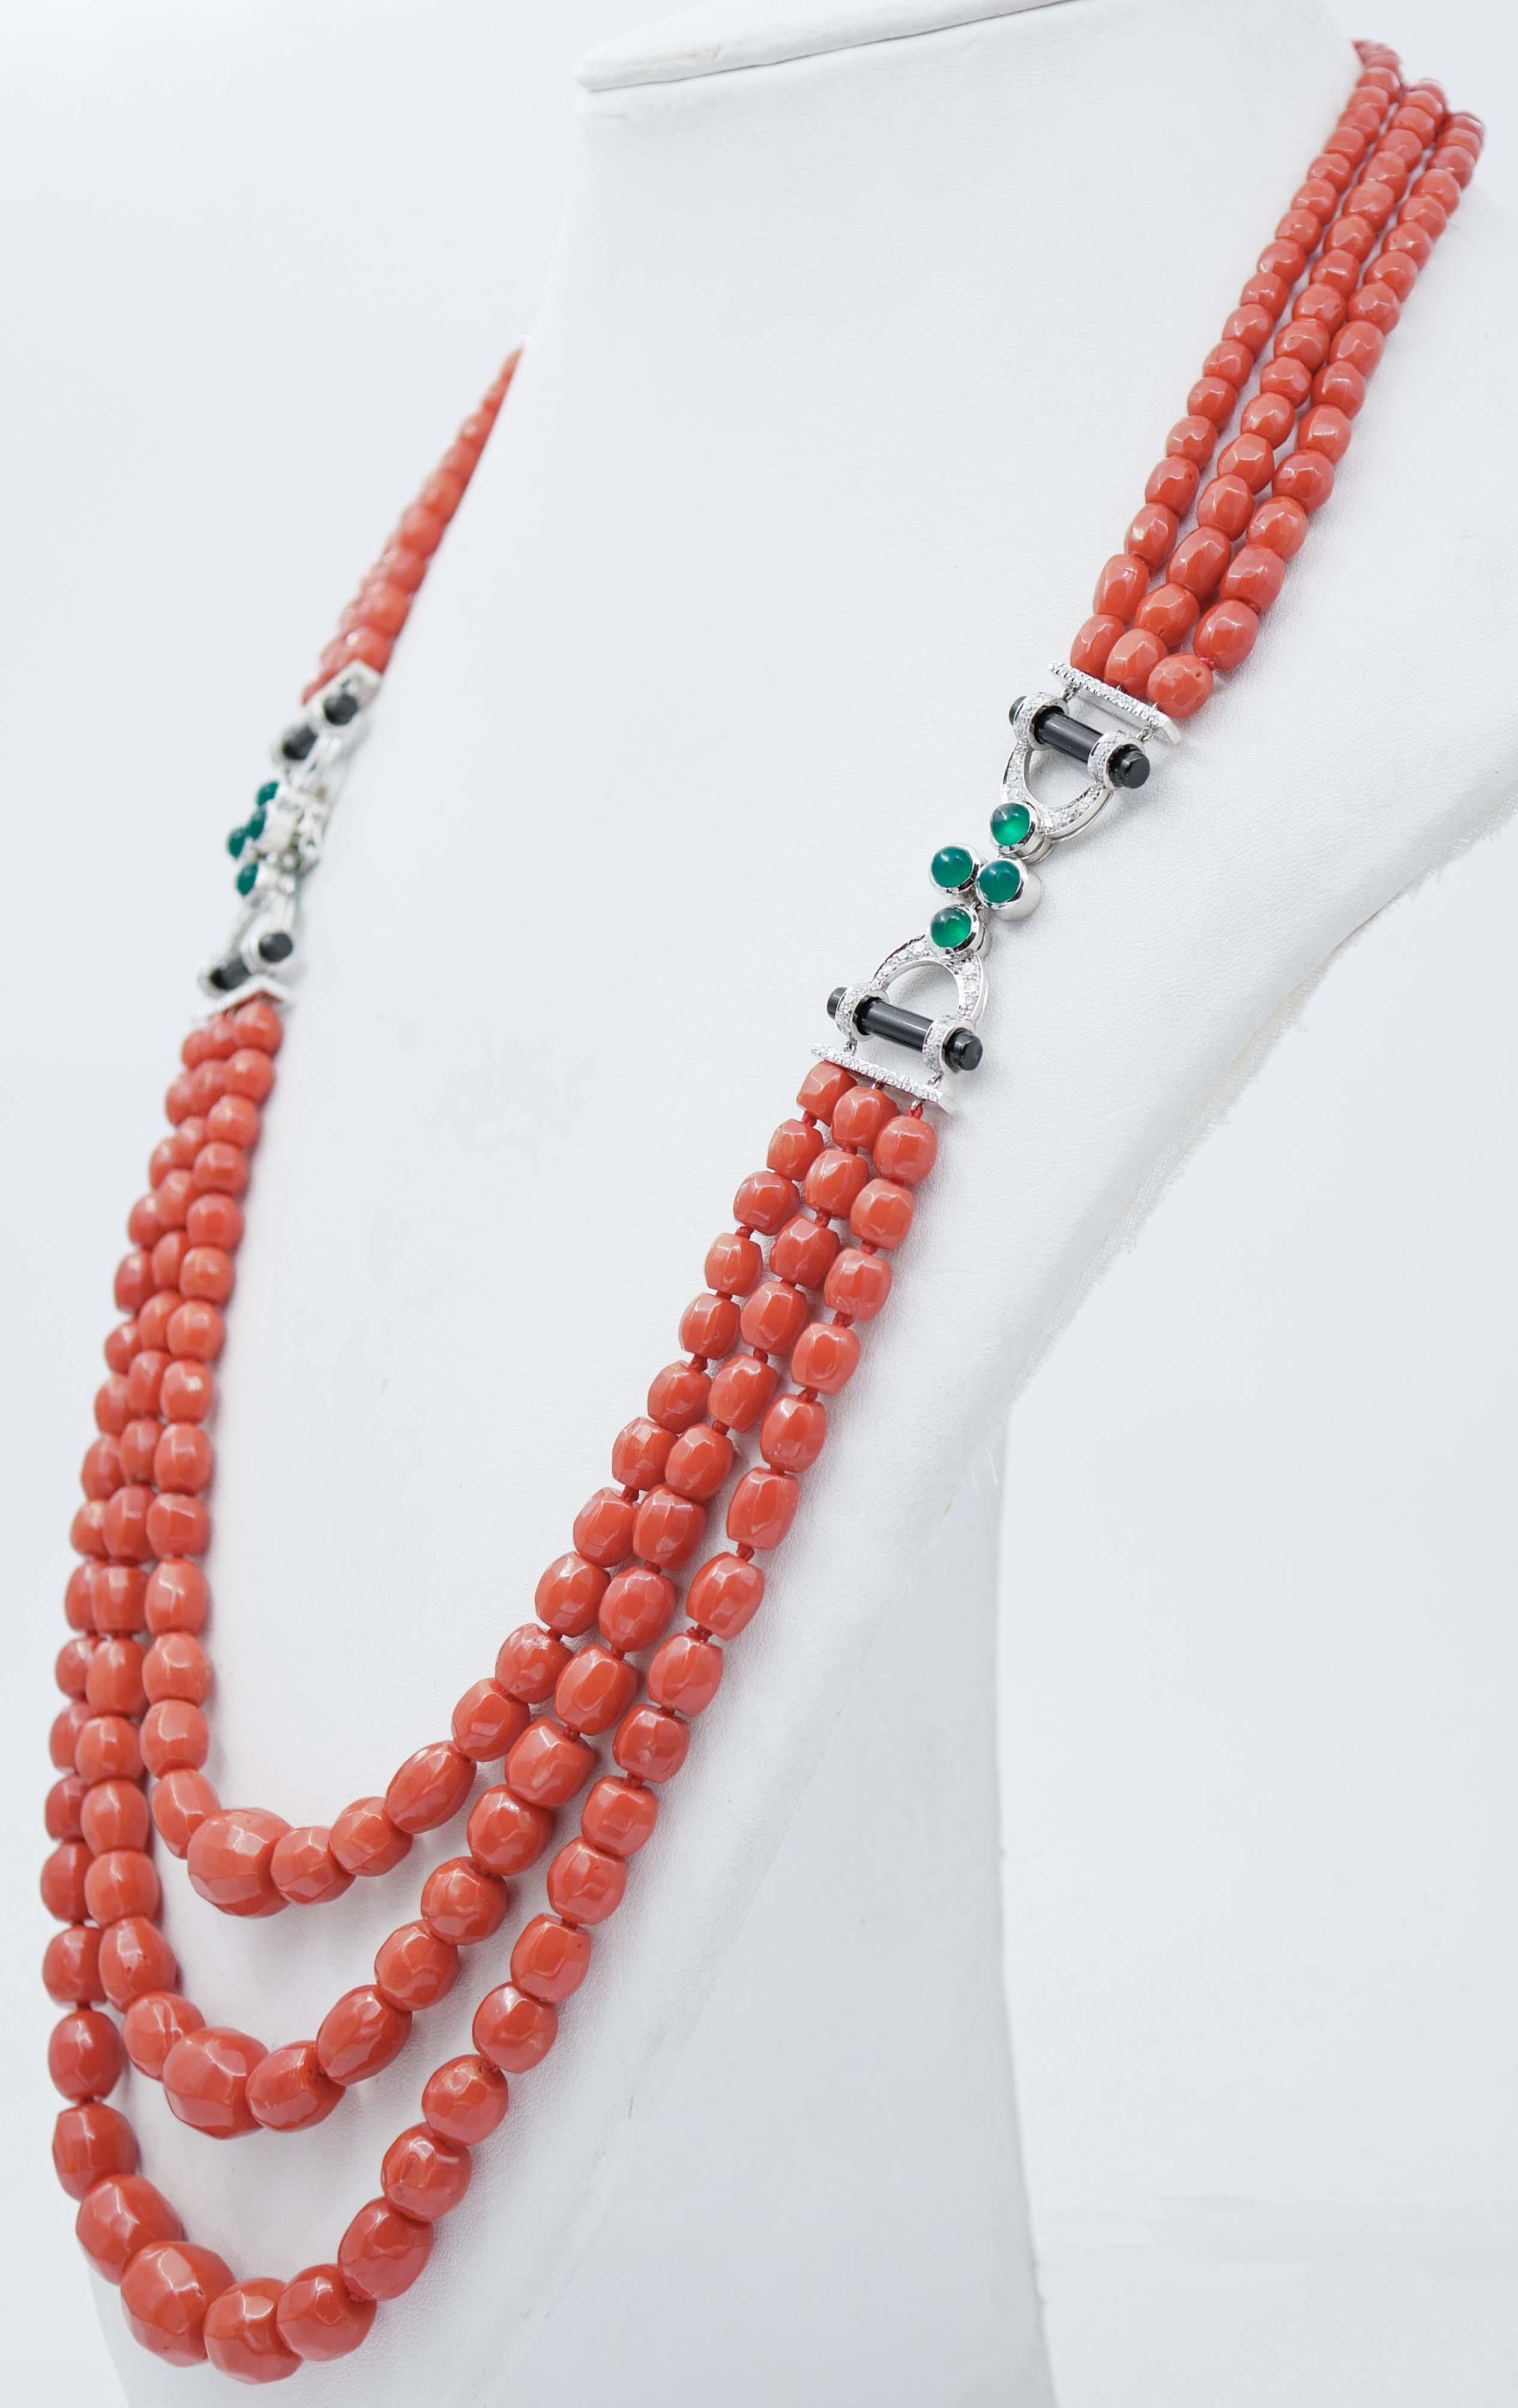 SHIPPING POLICY: 
No additional costs will be added to this order. 
Shipping costs will be totally covered by the seller (customs duties included).

Beautiful multistrands necklace  composed of two sections of three strands of coral separated by